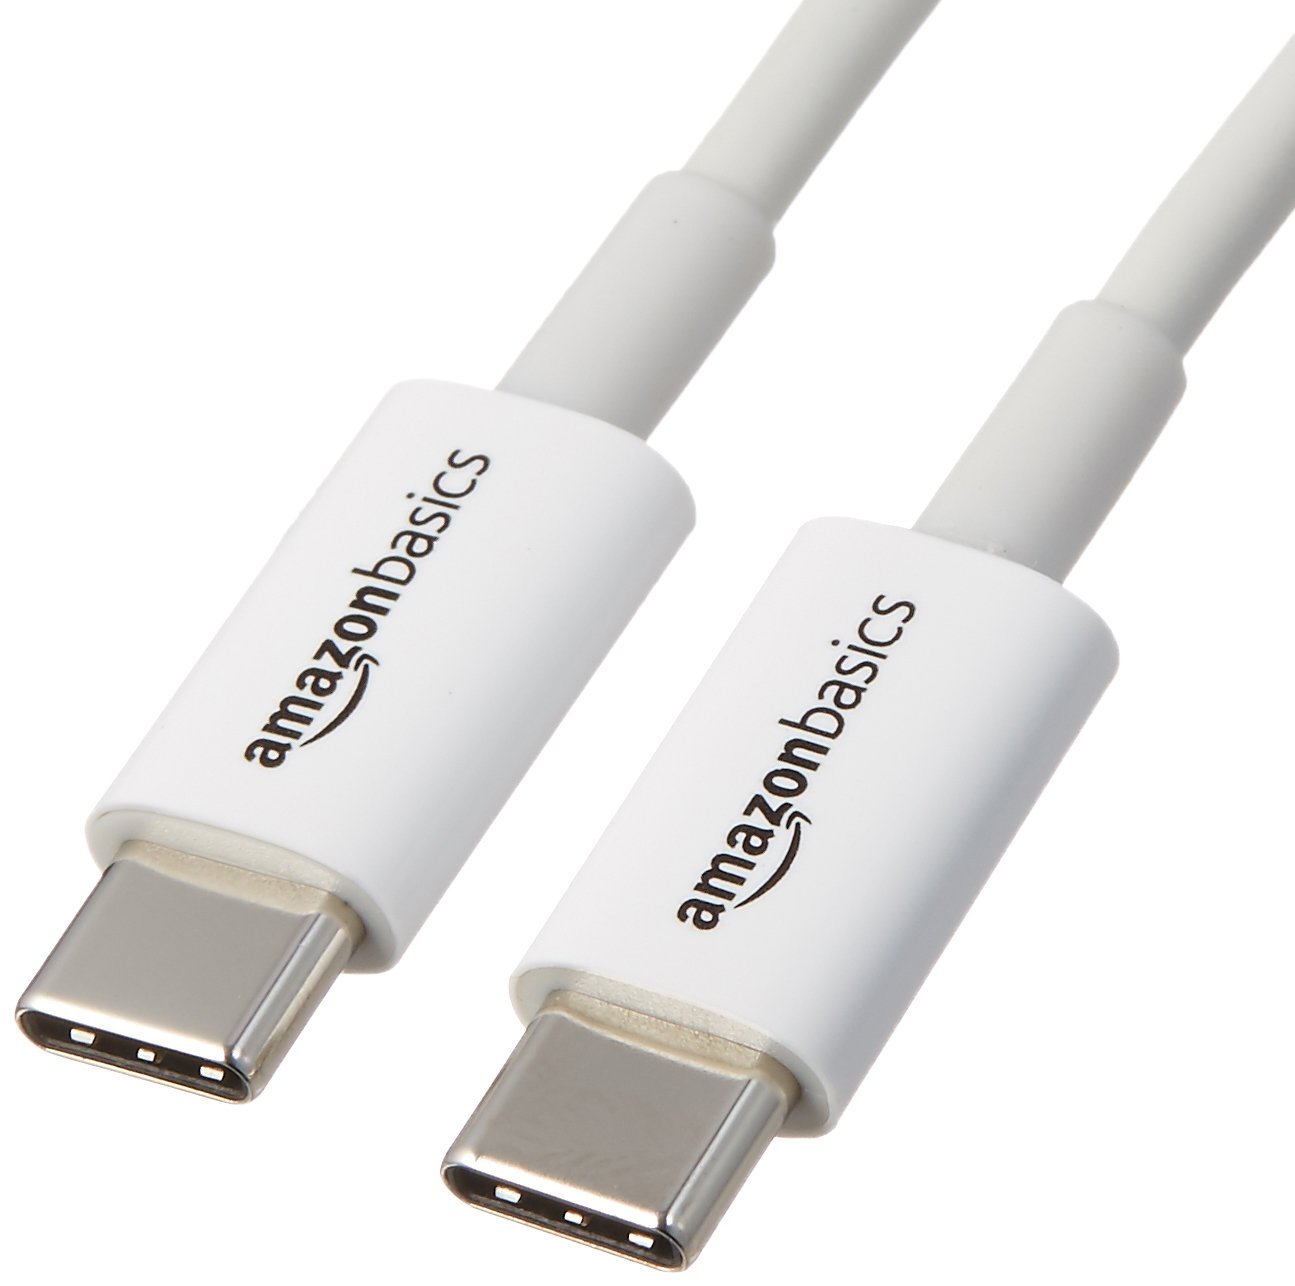 AmazonBasics USB Type-C to USB Type-C 2.0 Fast Charging Cable for Smartphone, Laptop - 6 Feet (1.8 Meters), White